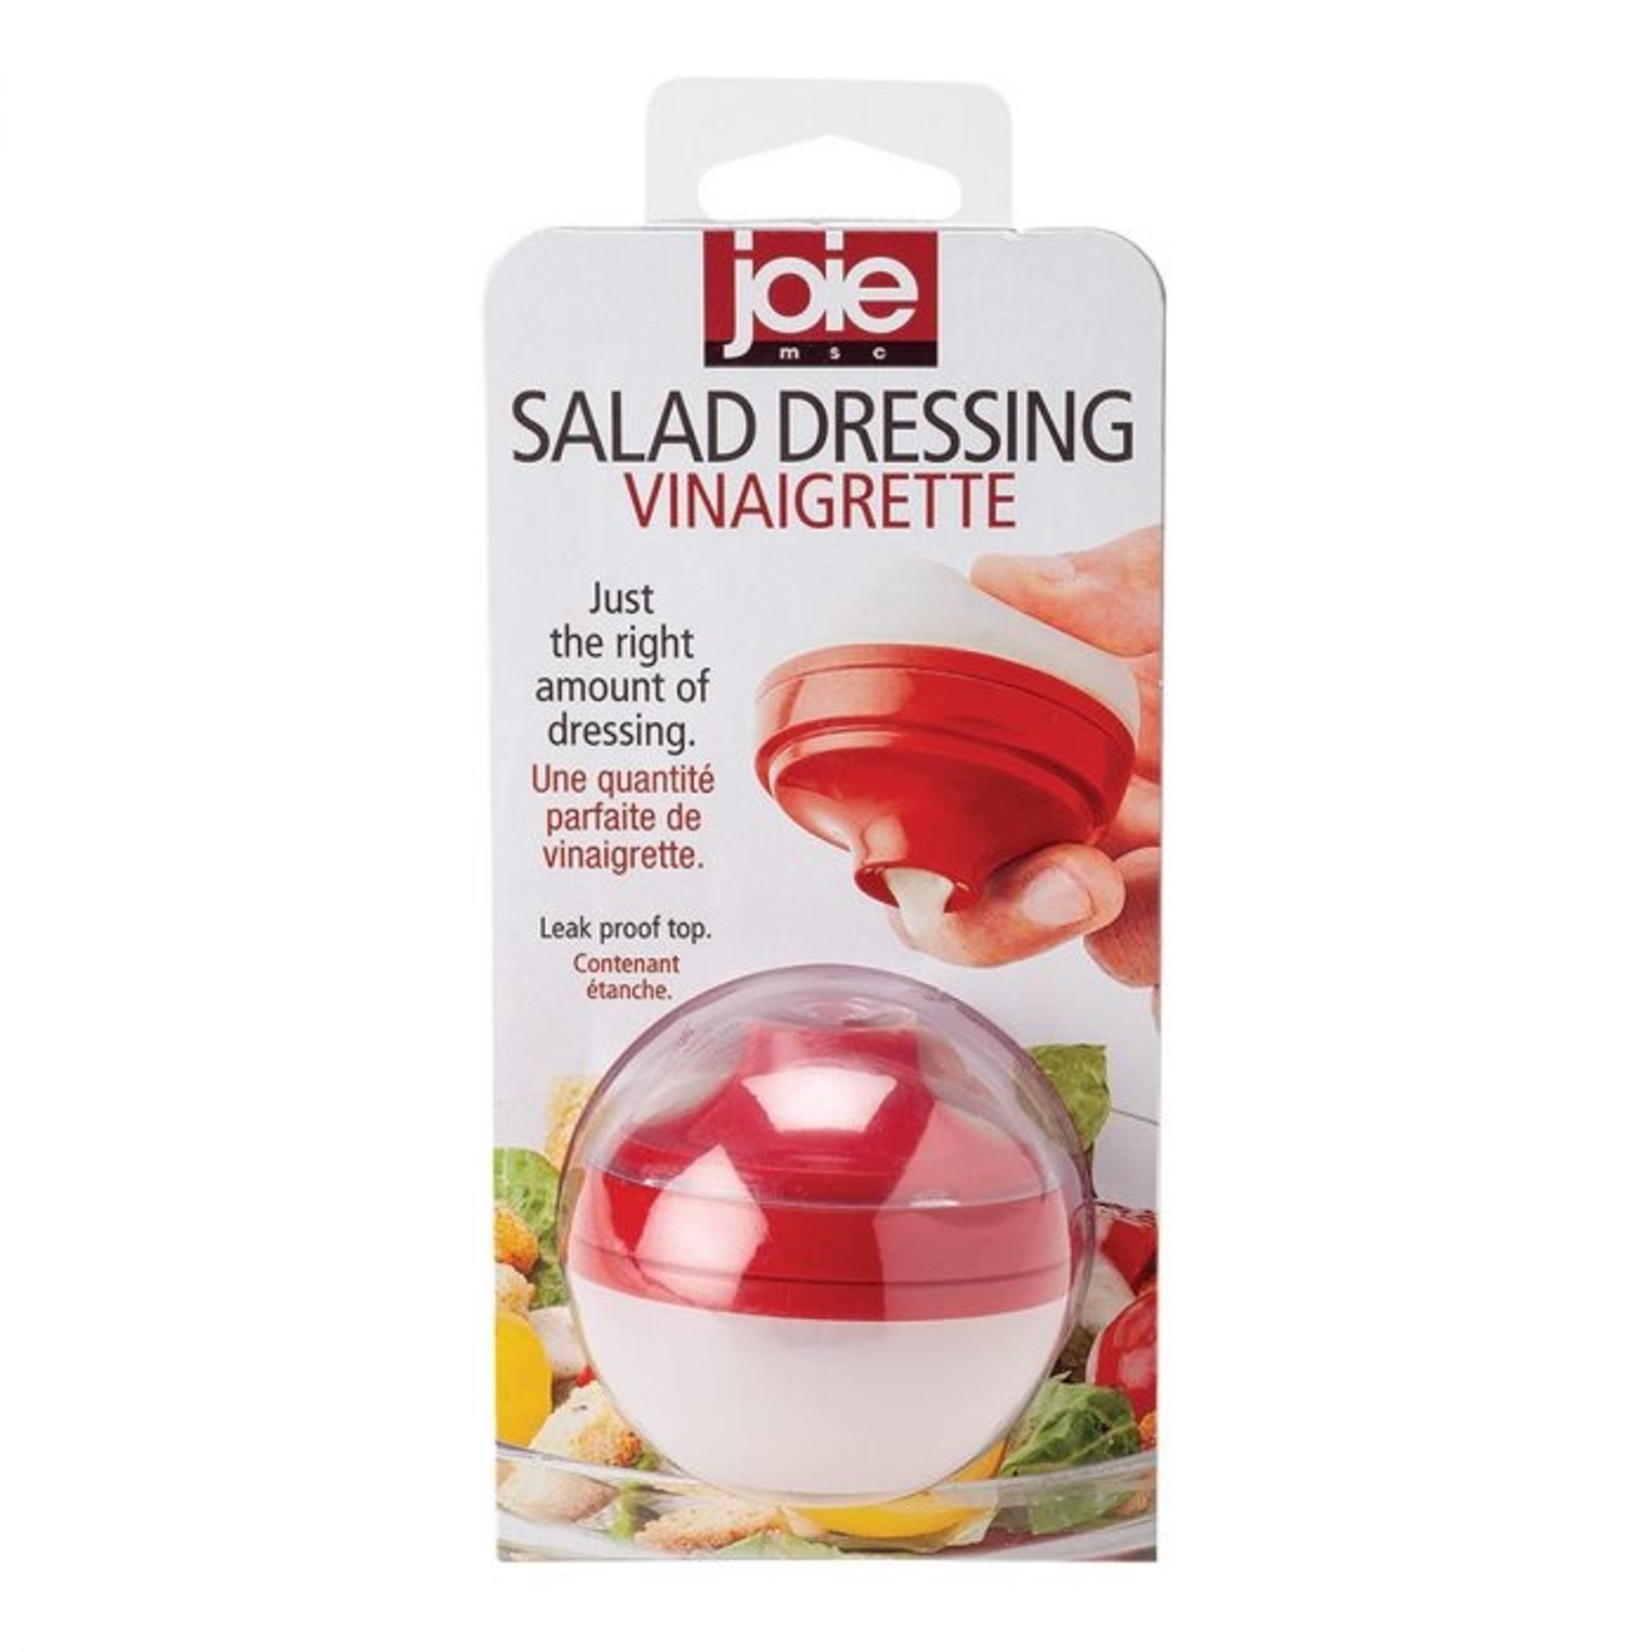 HIC Harold Import Co Joie Salad Dressing To Go